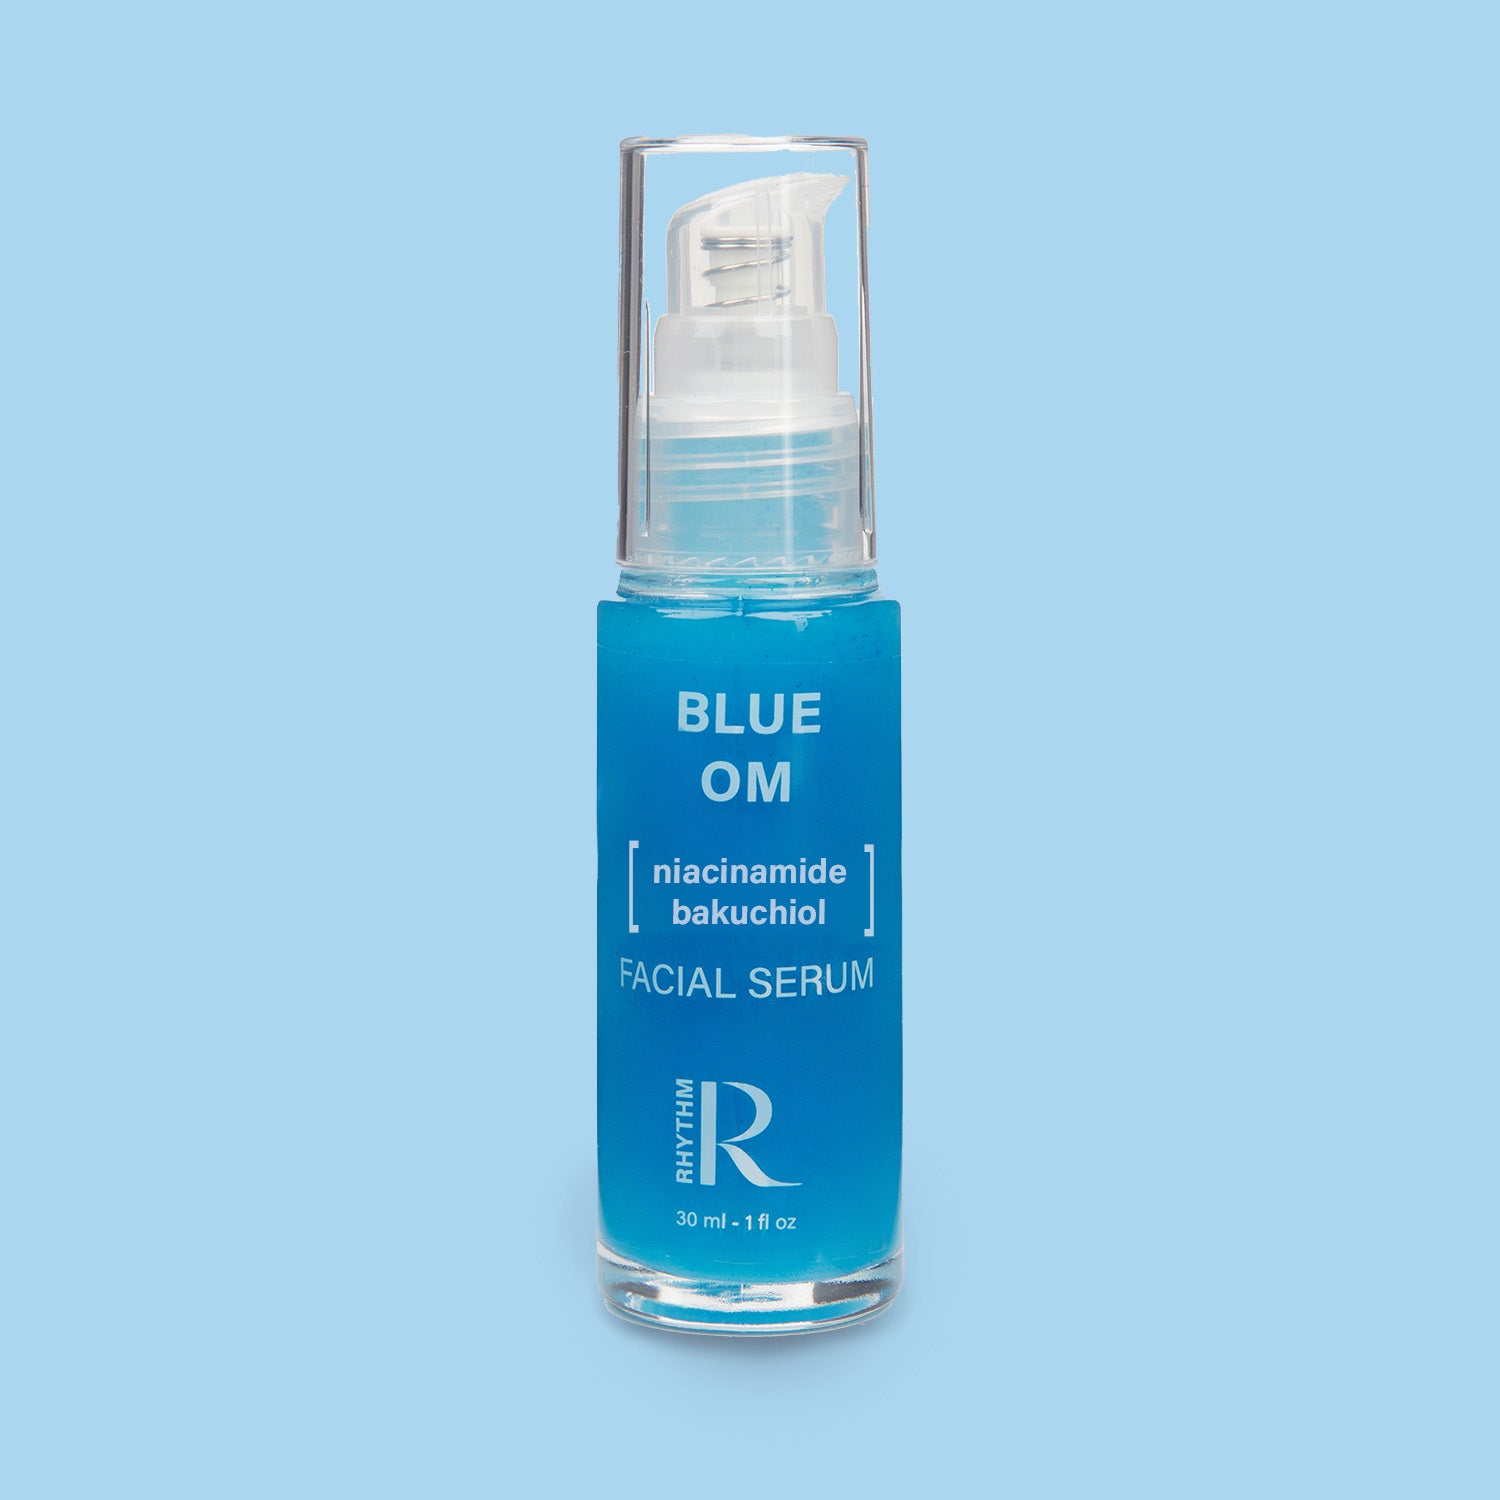 plant-based facial serum with bakuchiol and niacinamide from Rhythm Skin Care